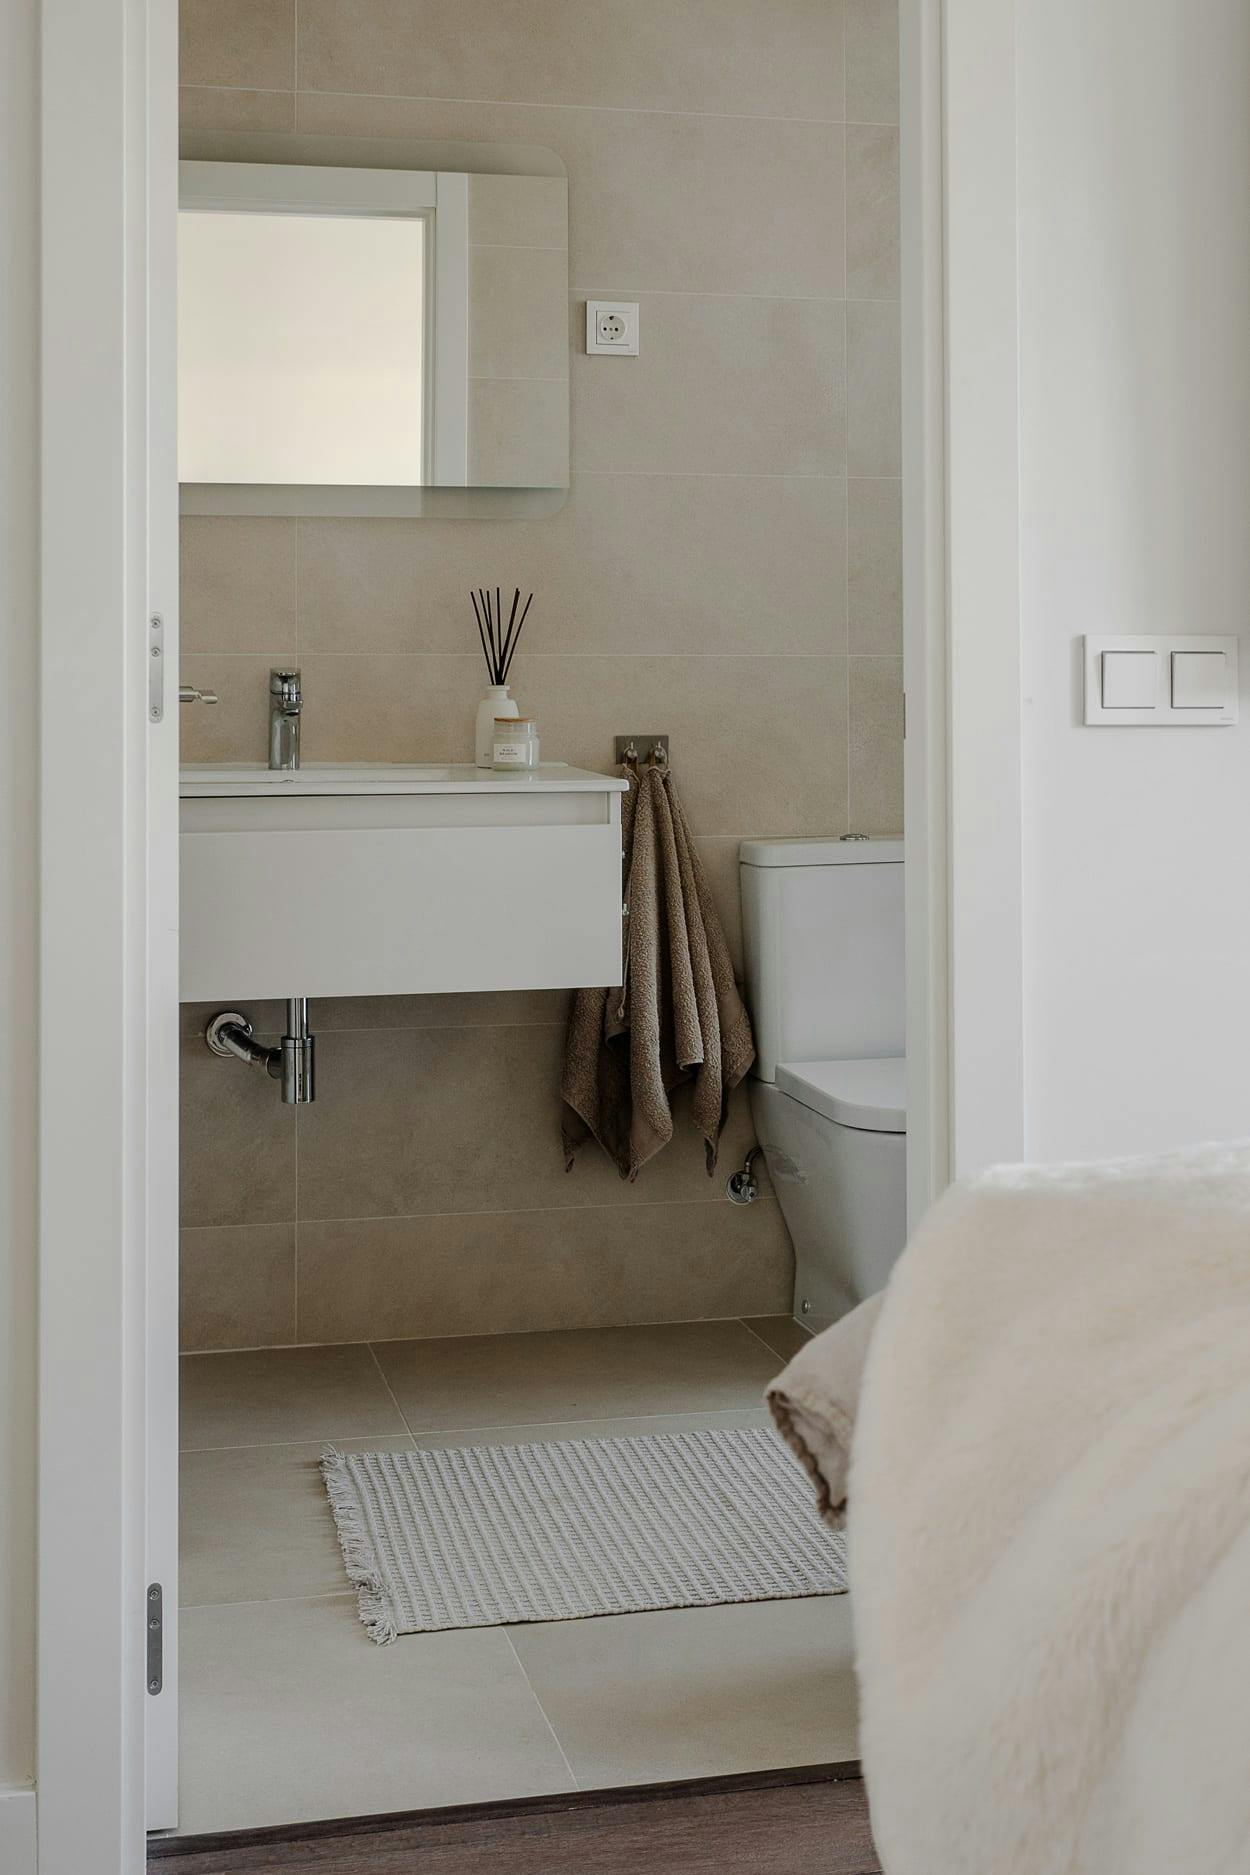 The image features a clean, white bathroom with a toilet, sink, and mirror.